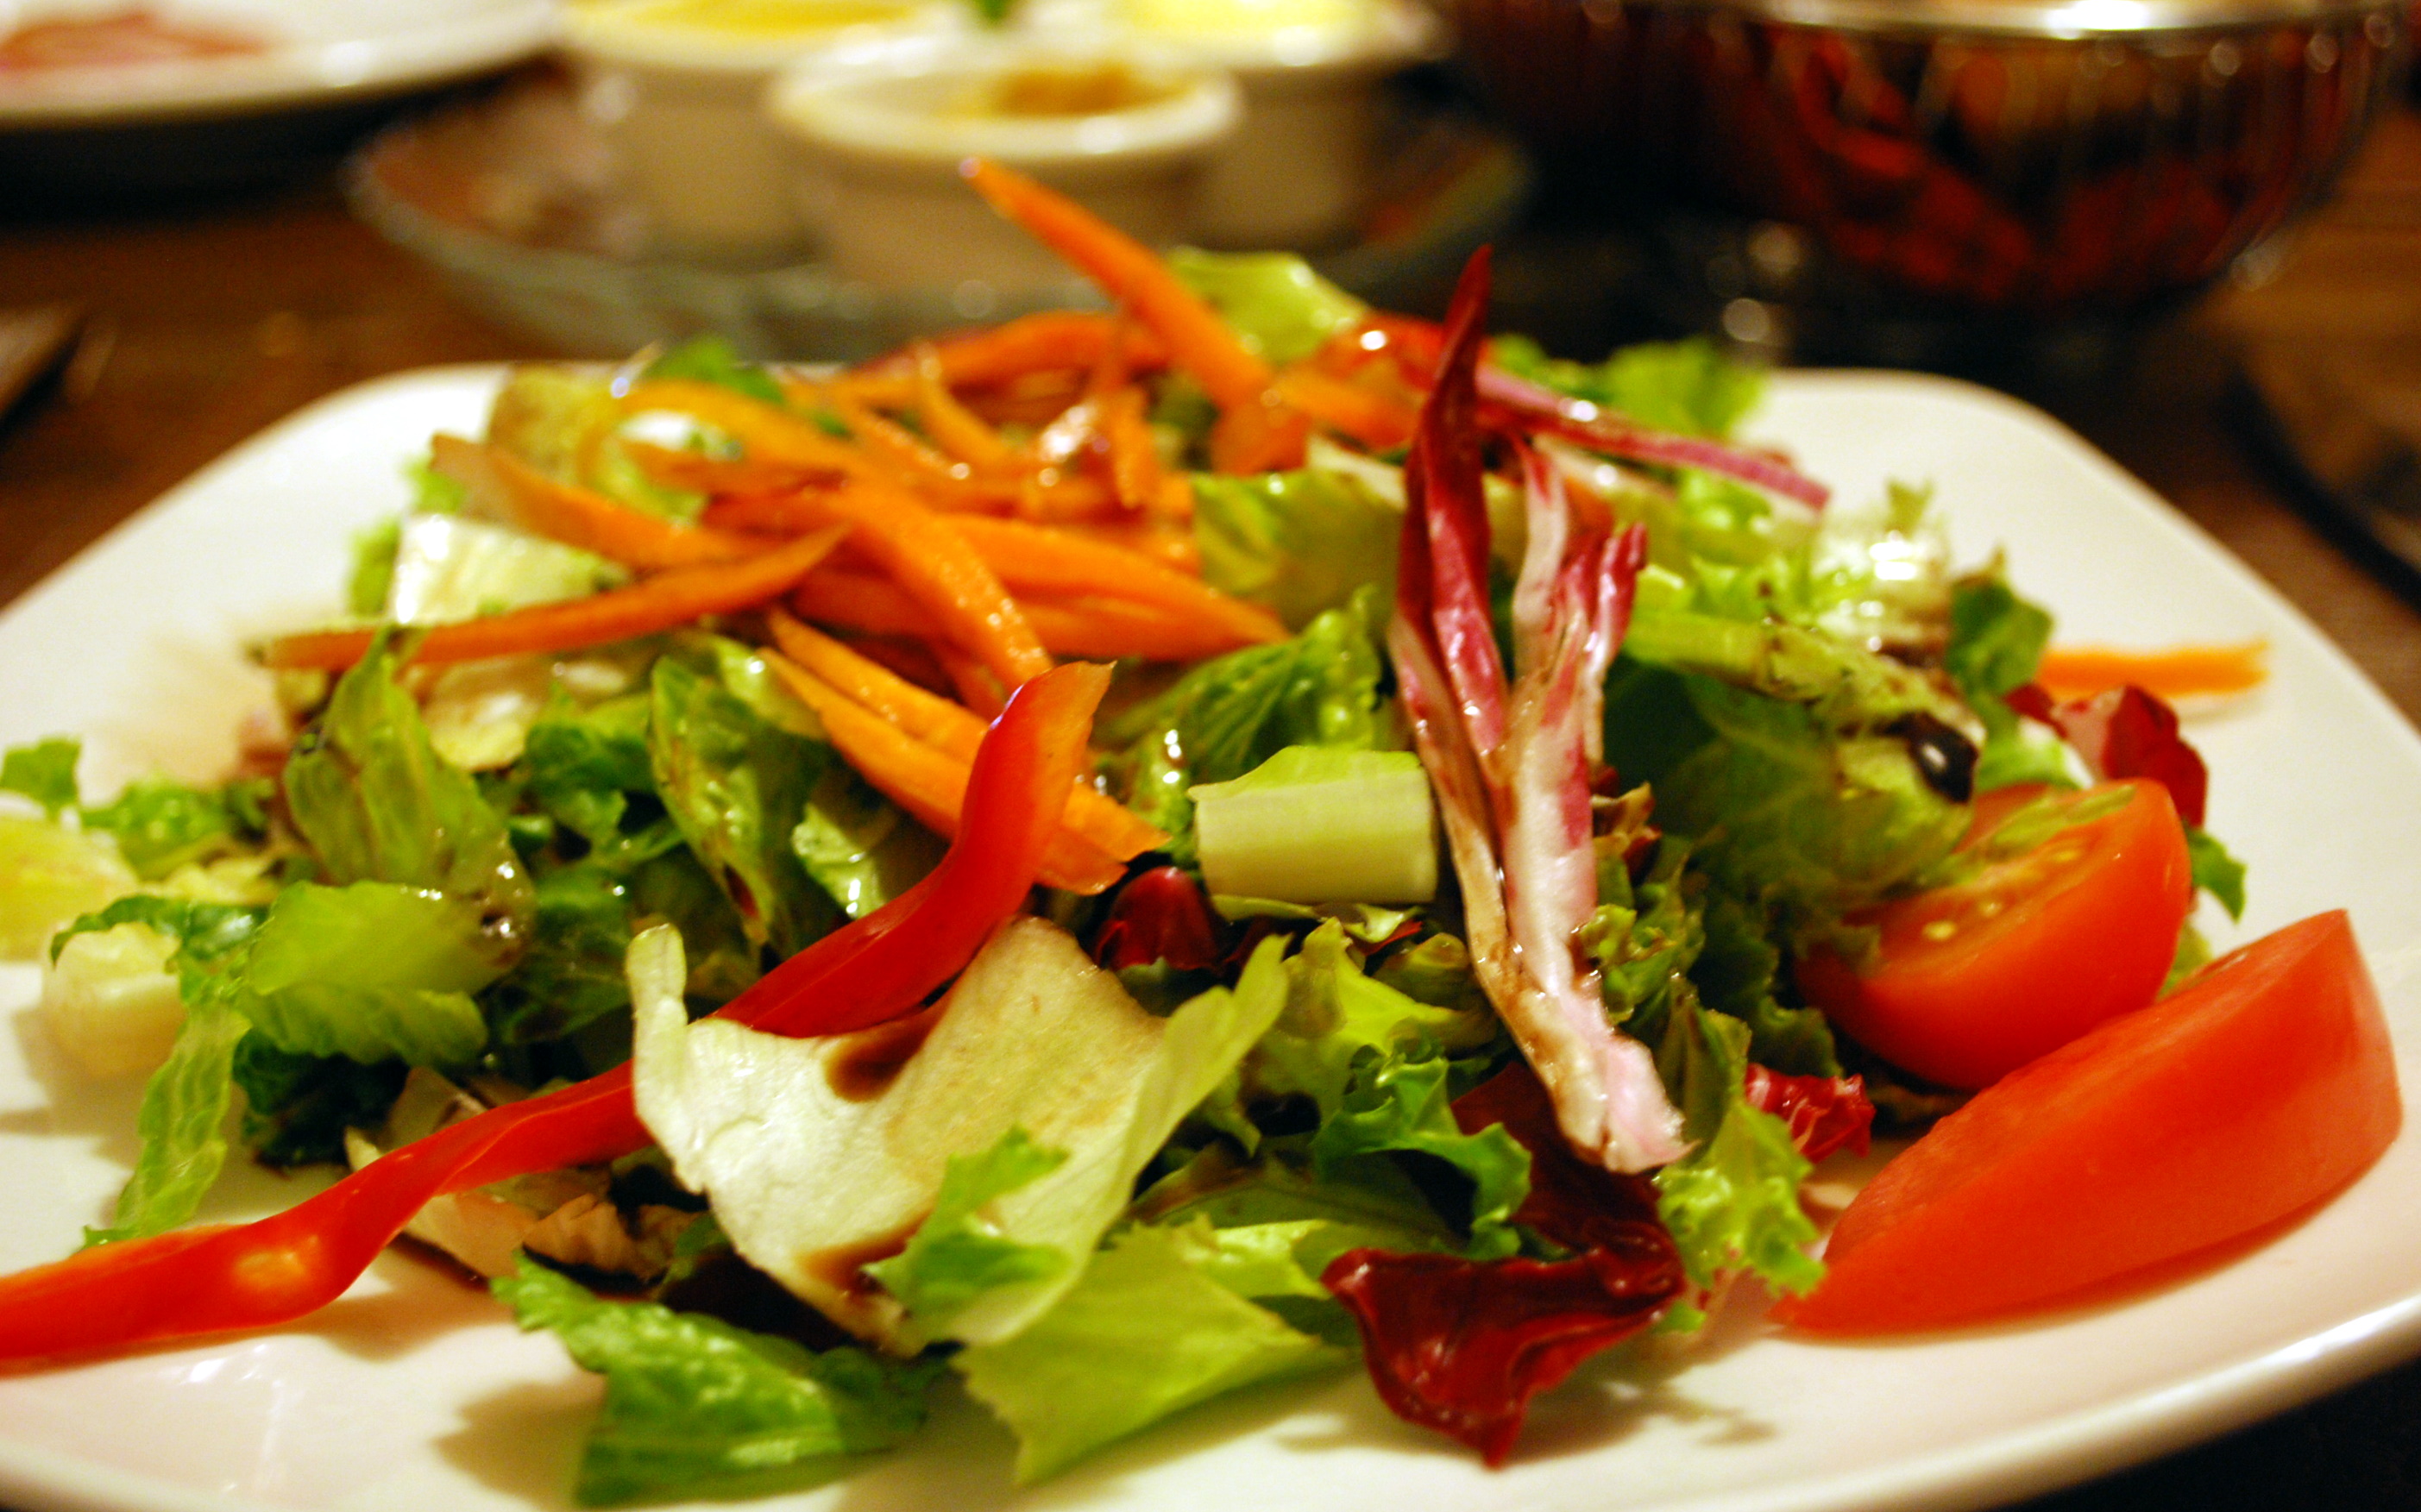 We both enjoyed a mixed greens and garden vegetable salad with oil and vinegar